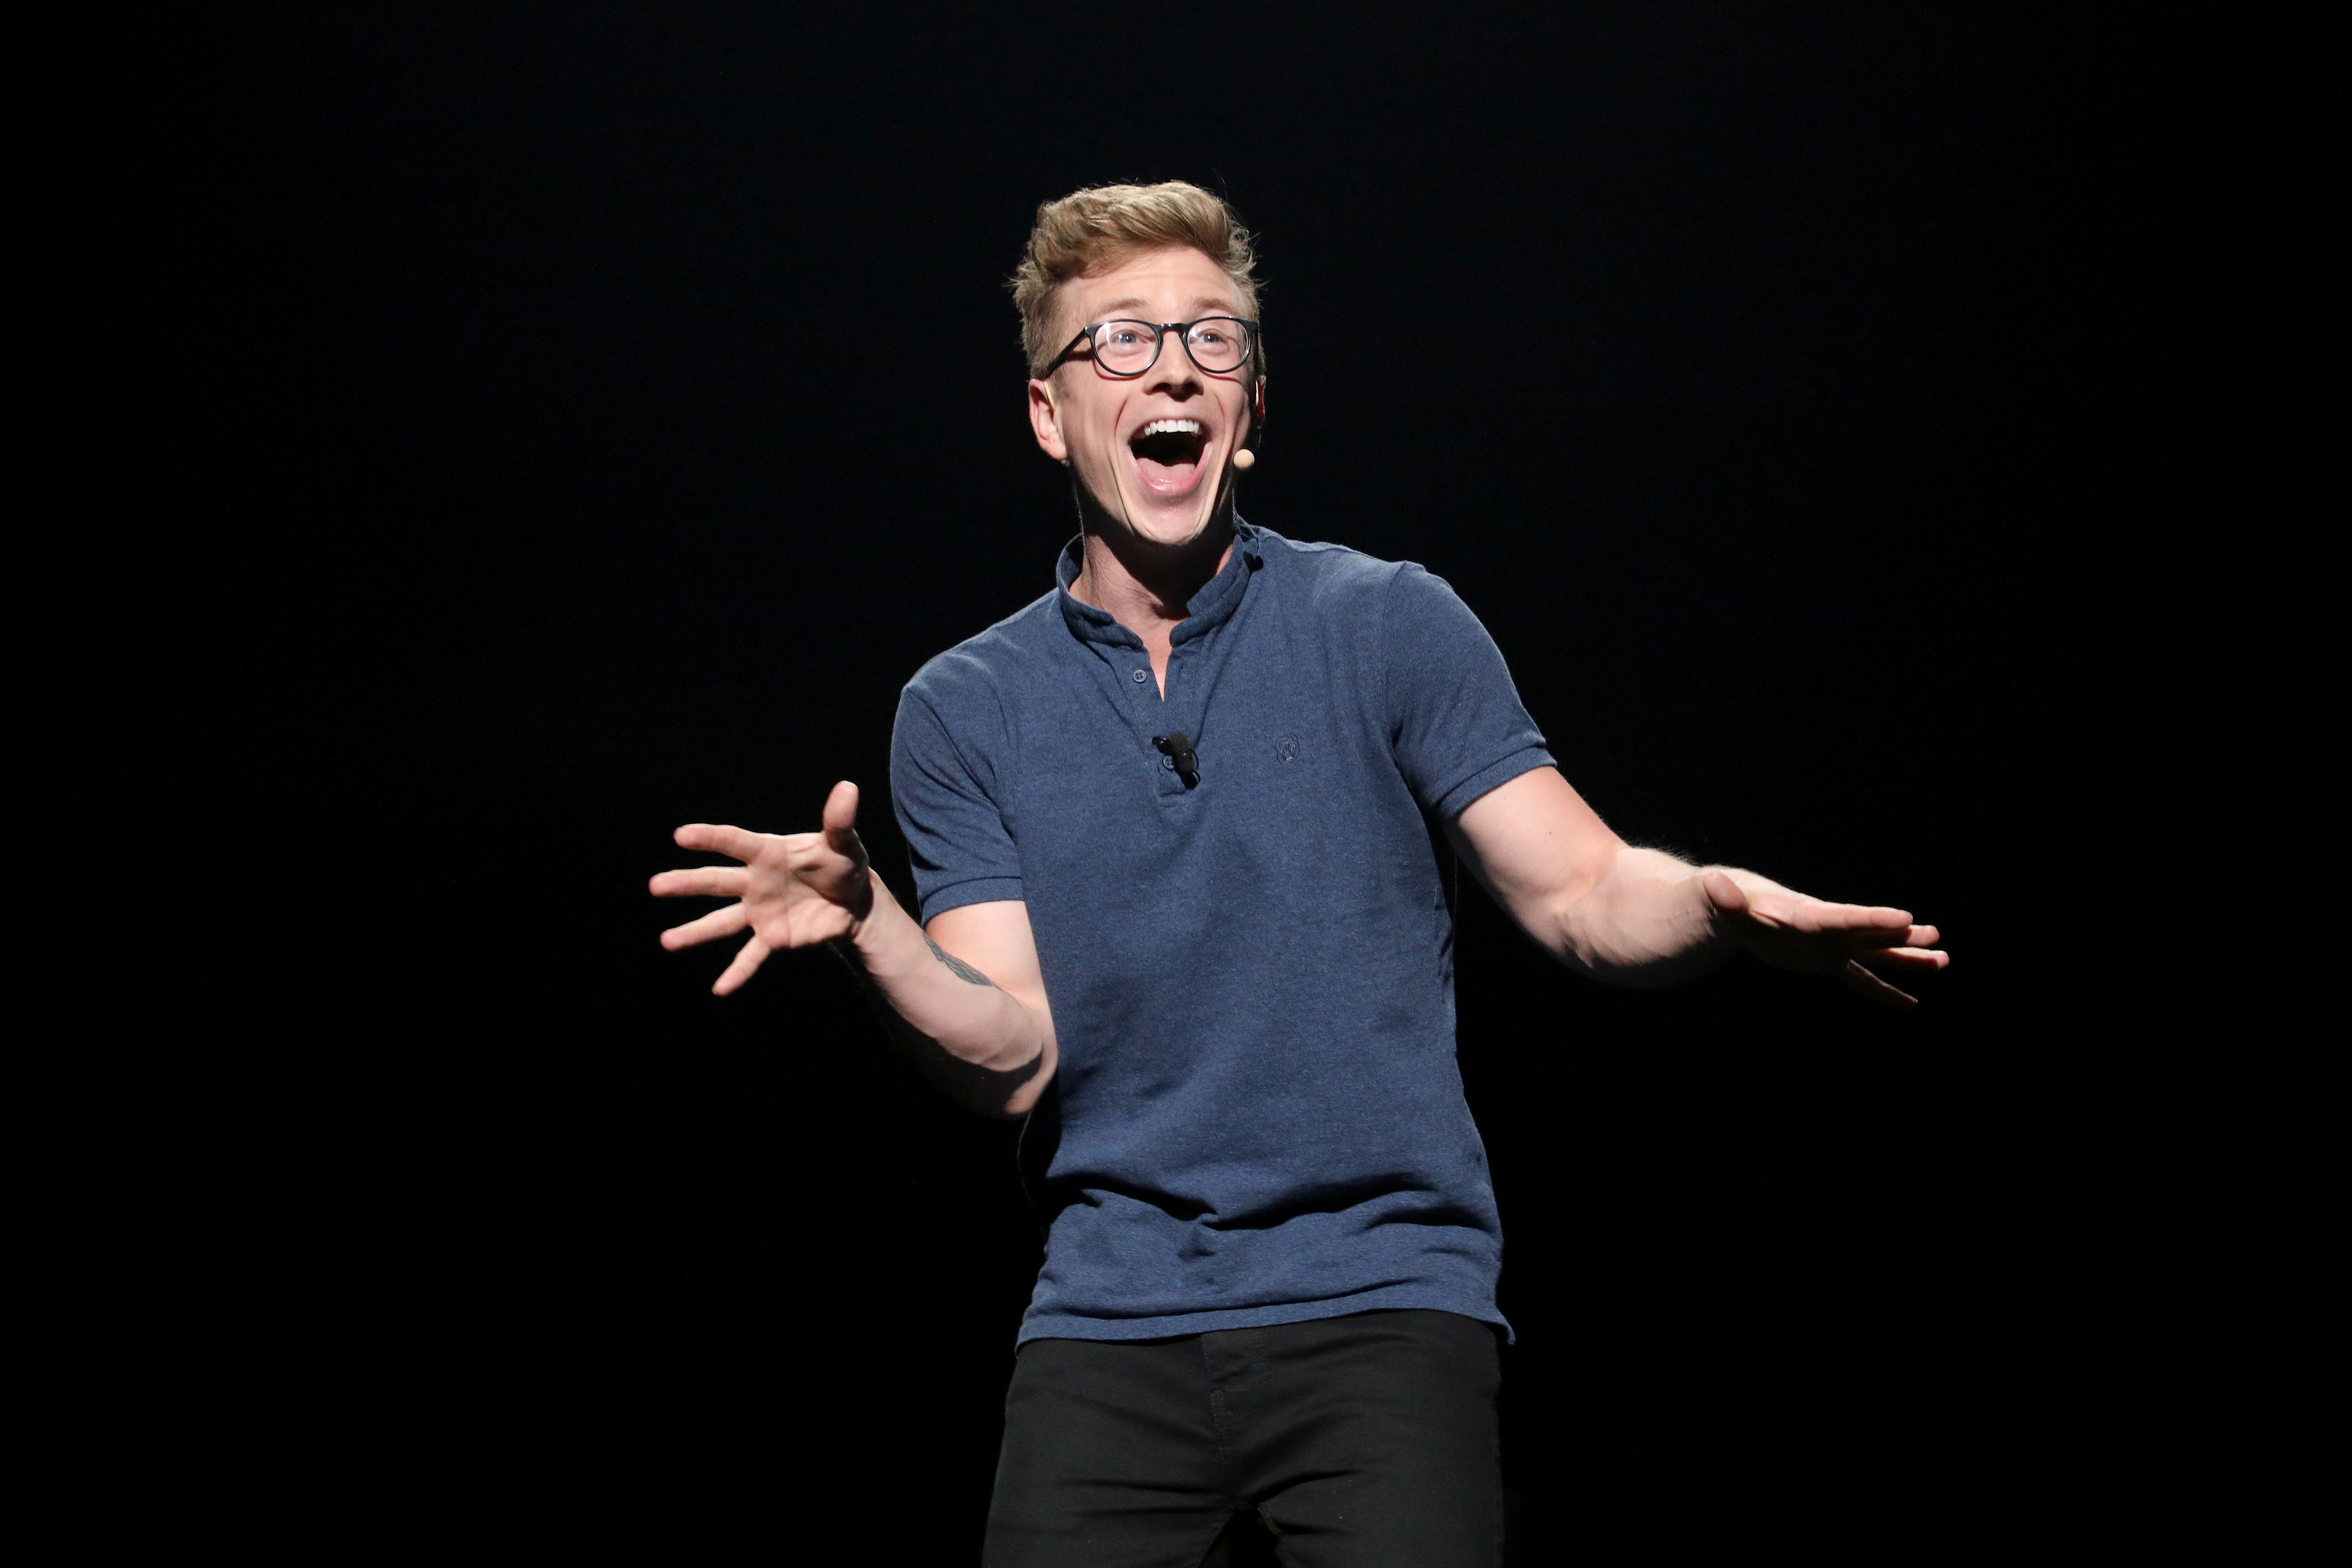 YouTube creator Tyler Oakley speaks onstage during the YouTube Brandcast 2018 presentation at Radio City Music Hall on May 3, 2018 in New York City